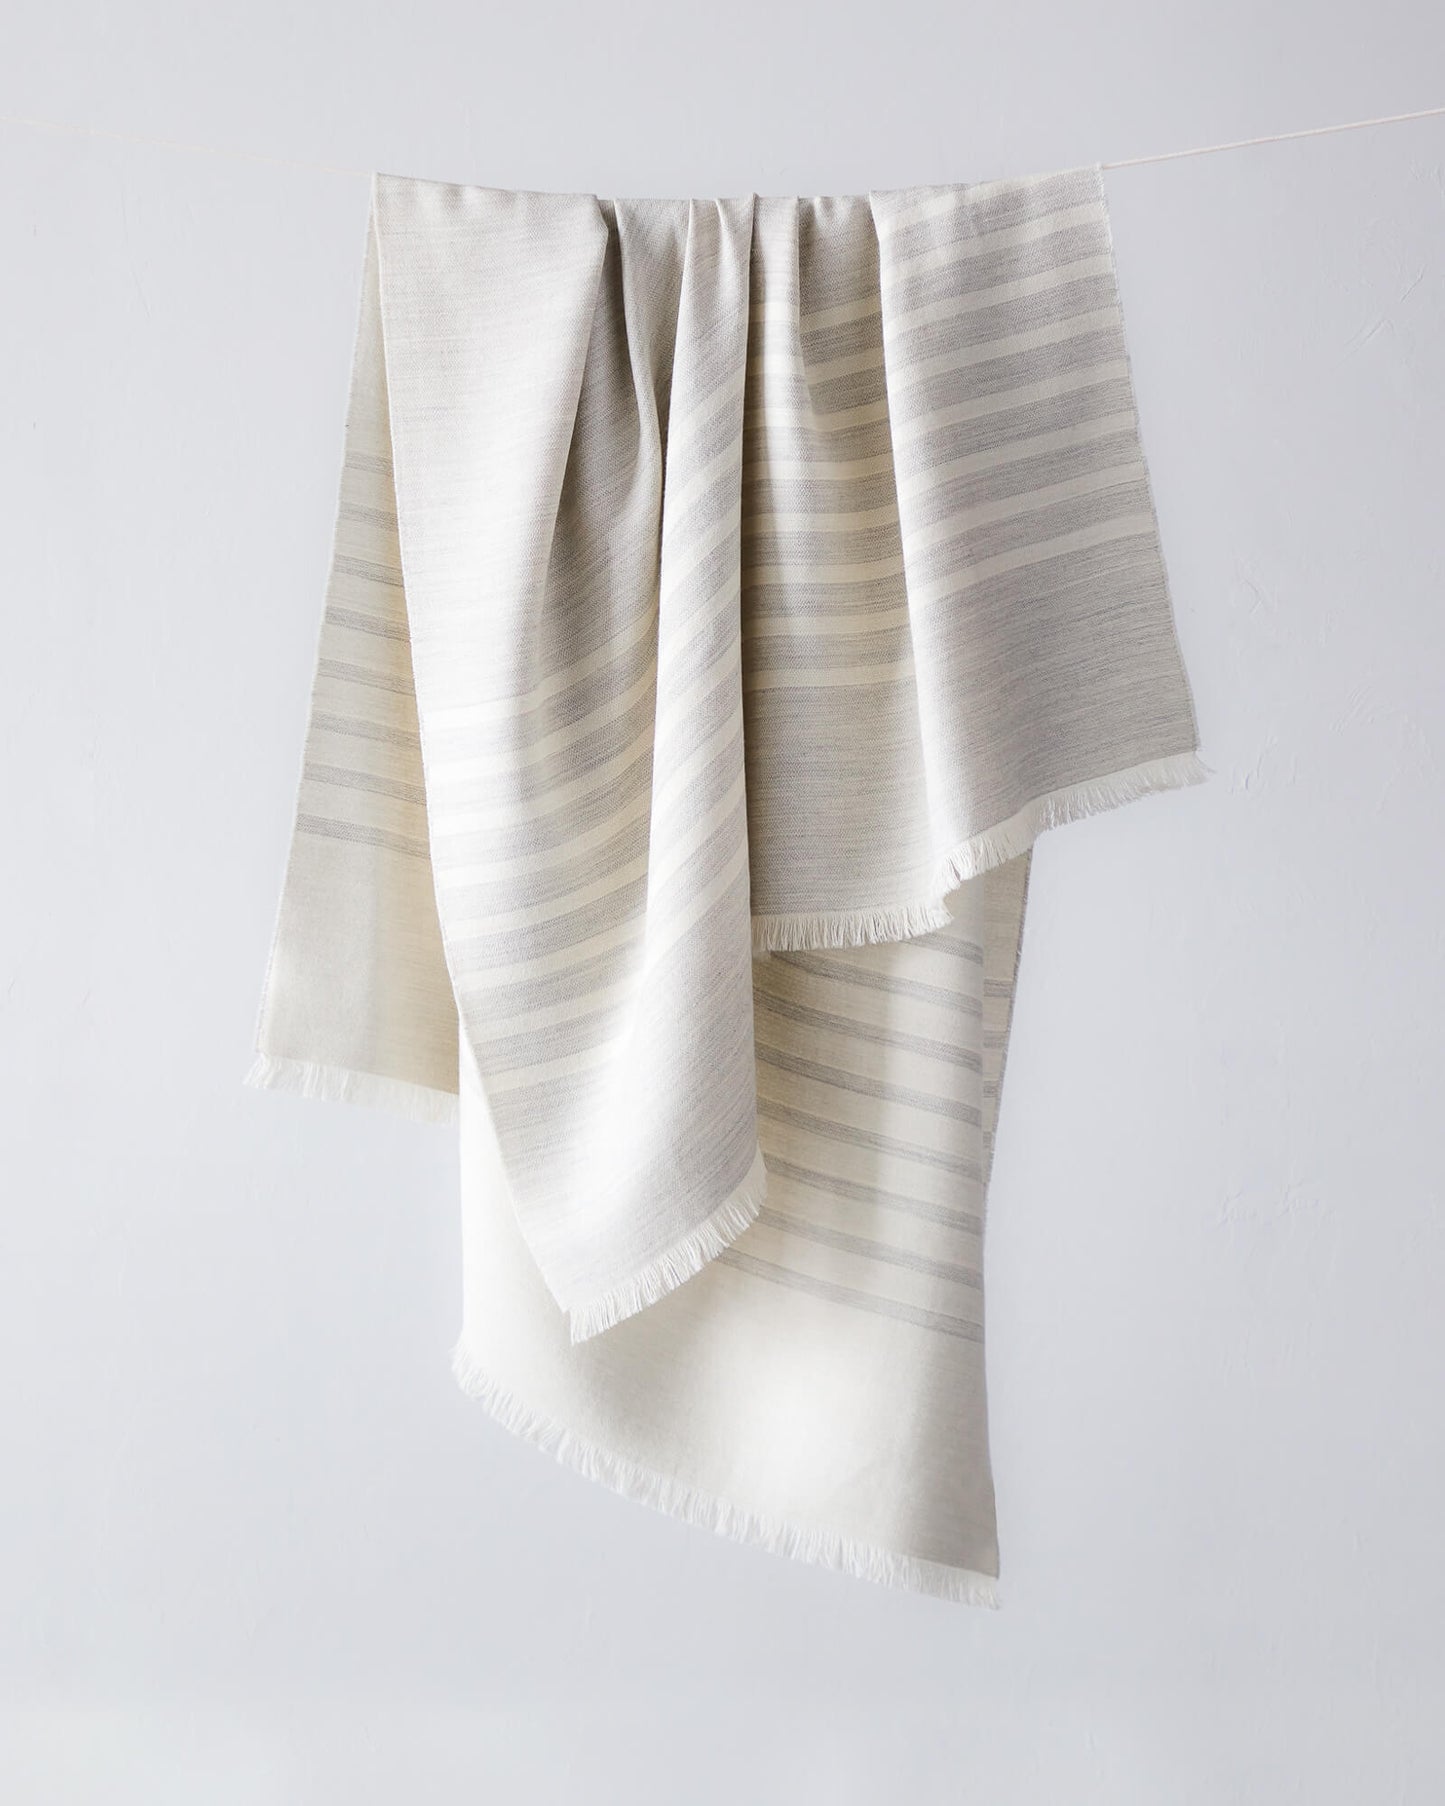 
                  
                    Fairkind Santiago alpaca throw blanket in gray with white stripes and contrasting sides modern design handwoven in Peru.
                  
                